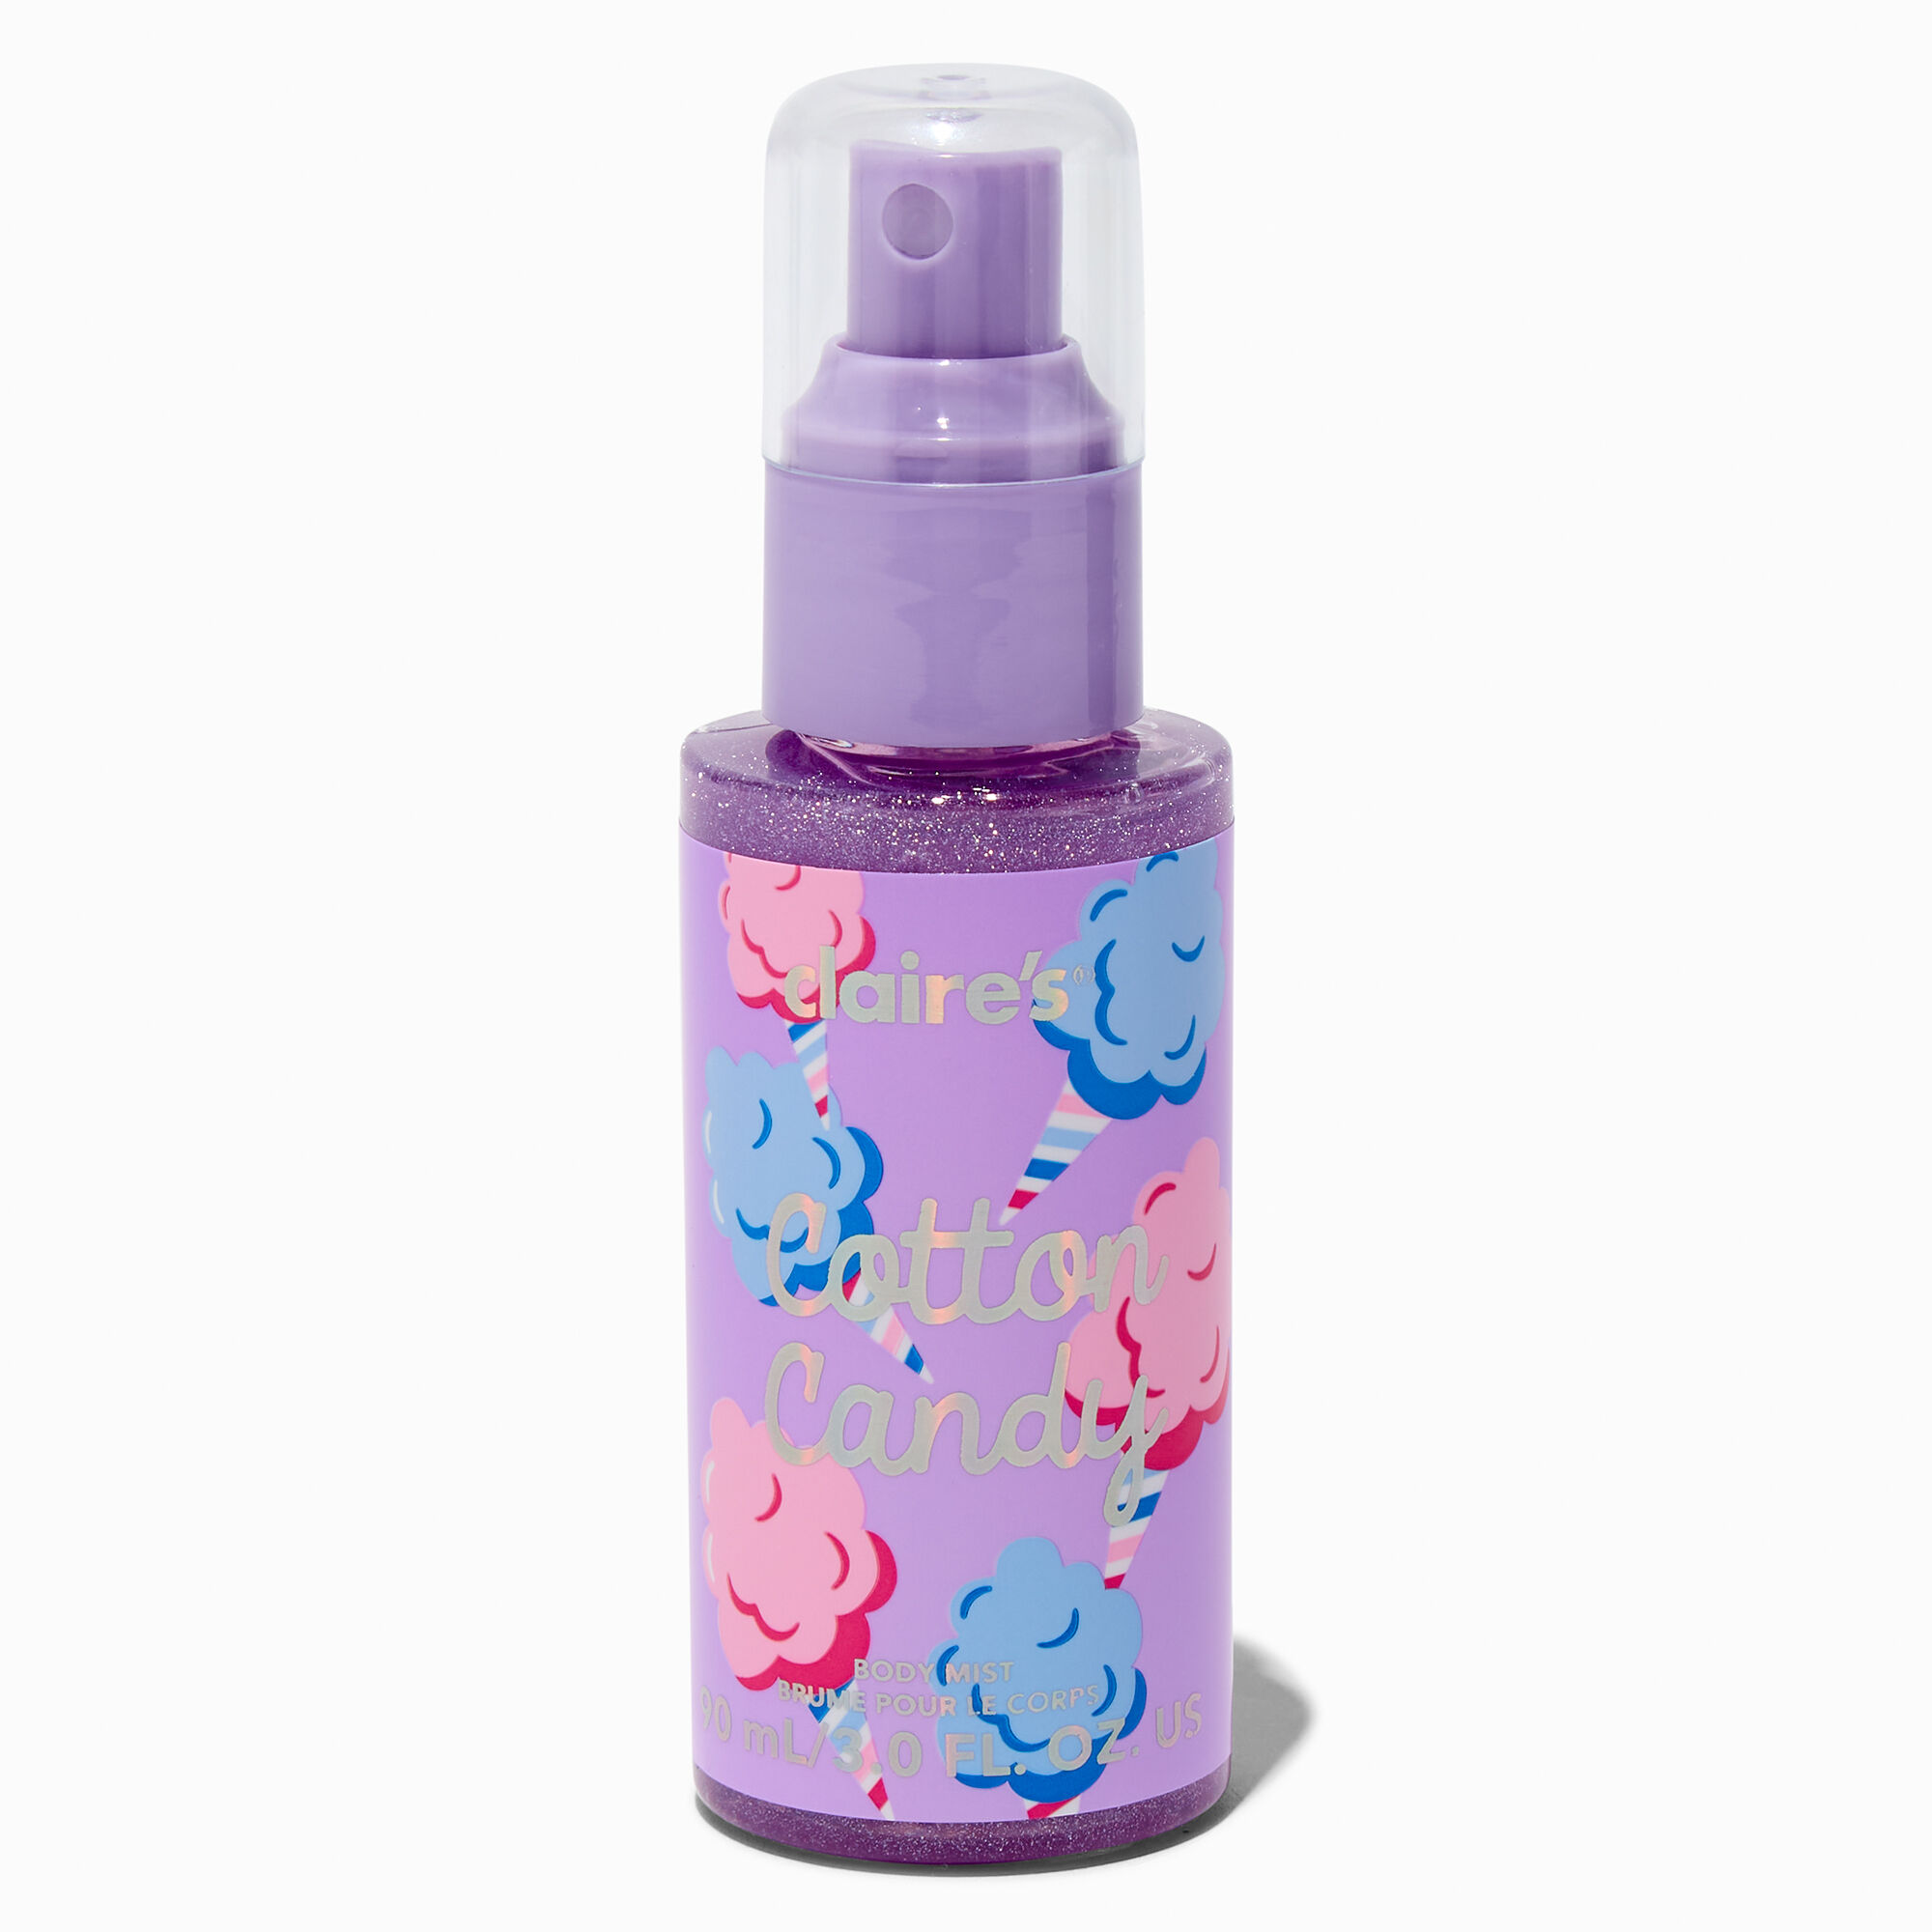 View Claires Cotton Candy Glitter Body Mist information